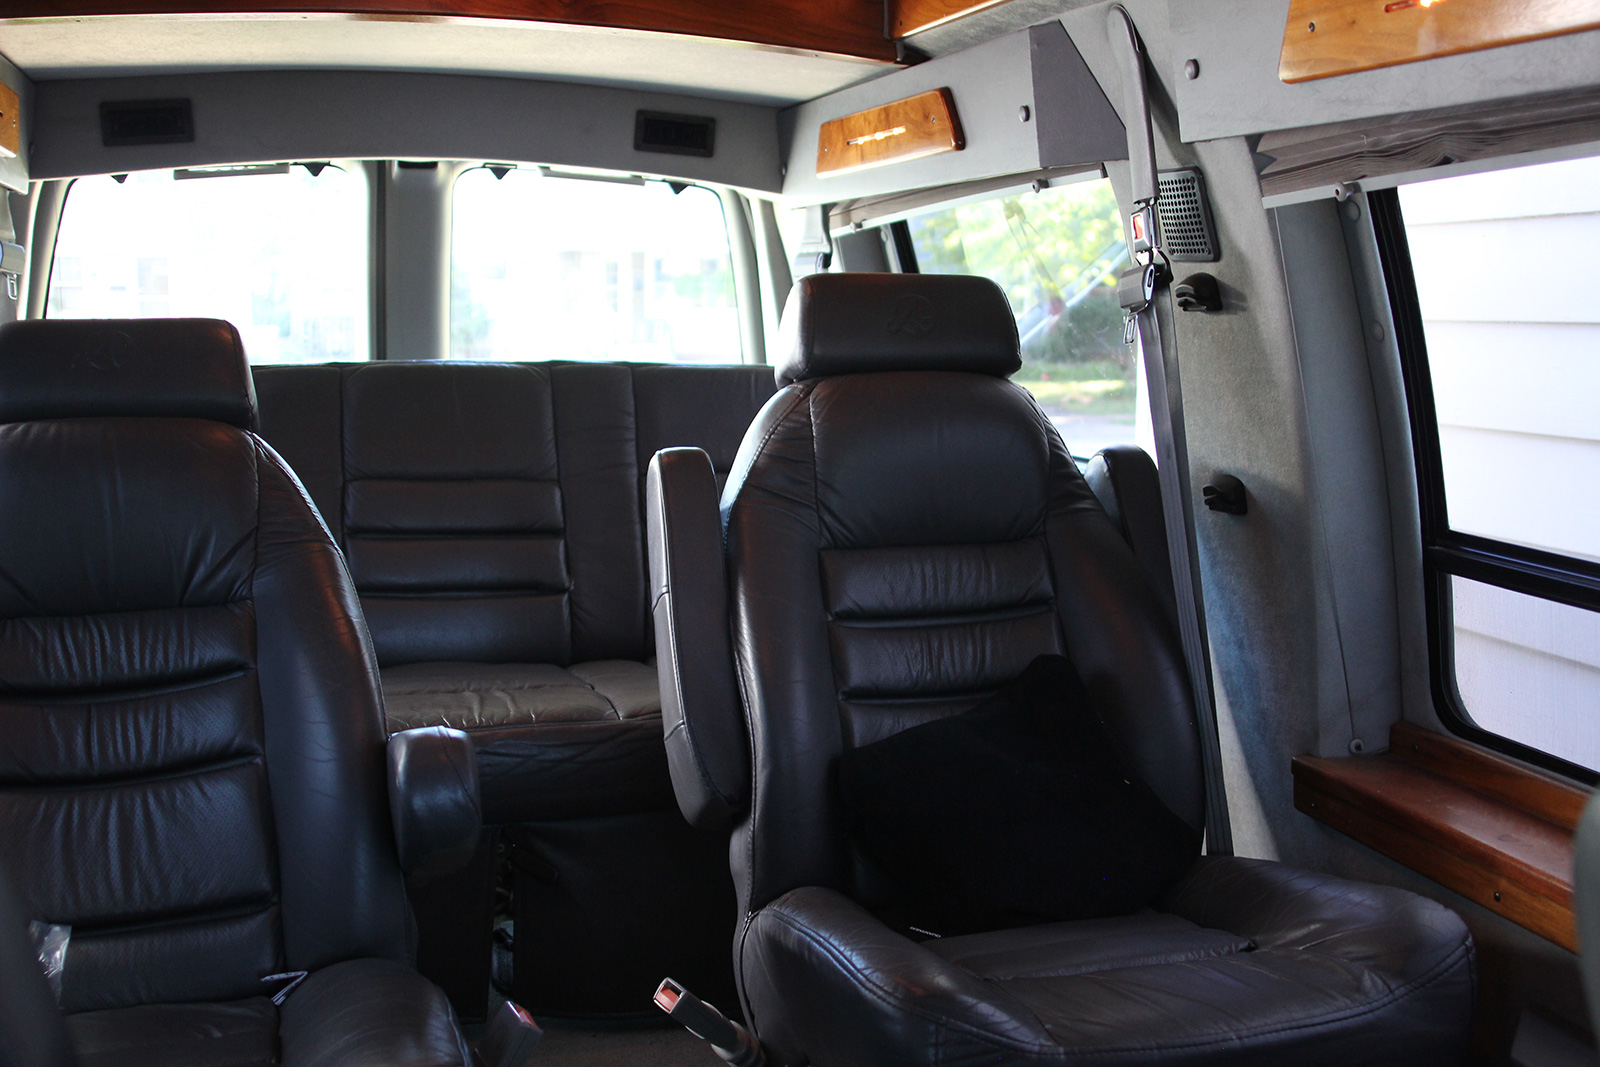 and comfy seats. Travelling inside this party van makes even the longest field trips amazing and not in the slightest boring.